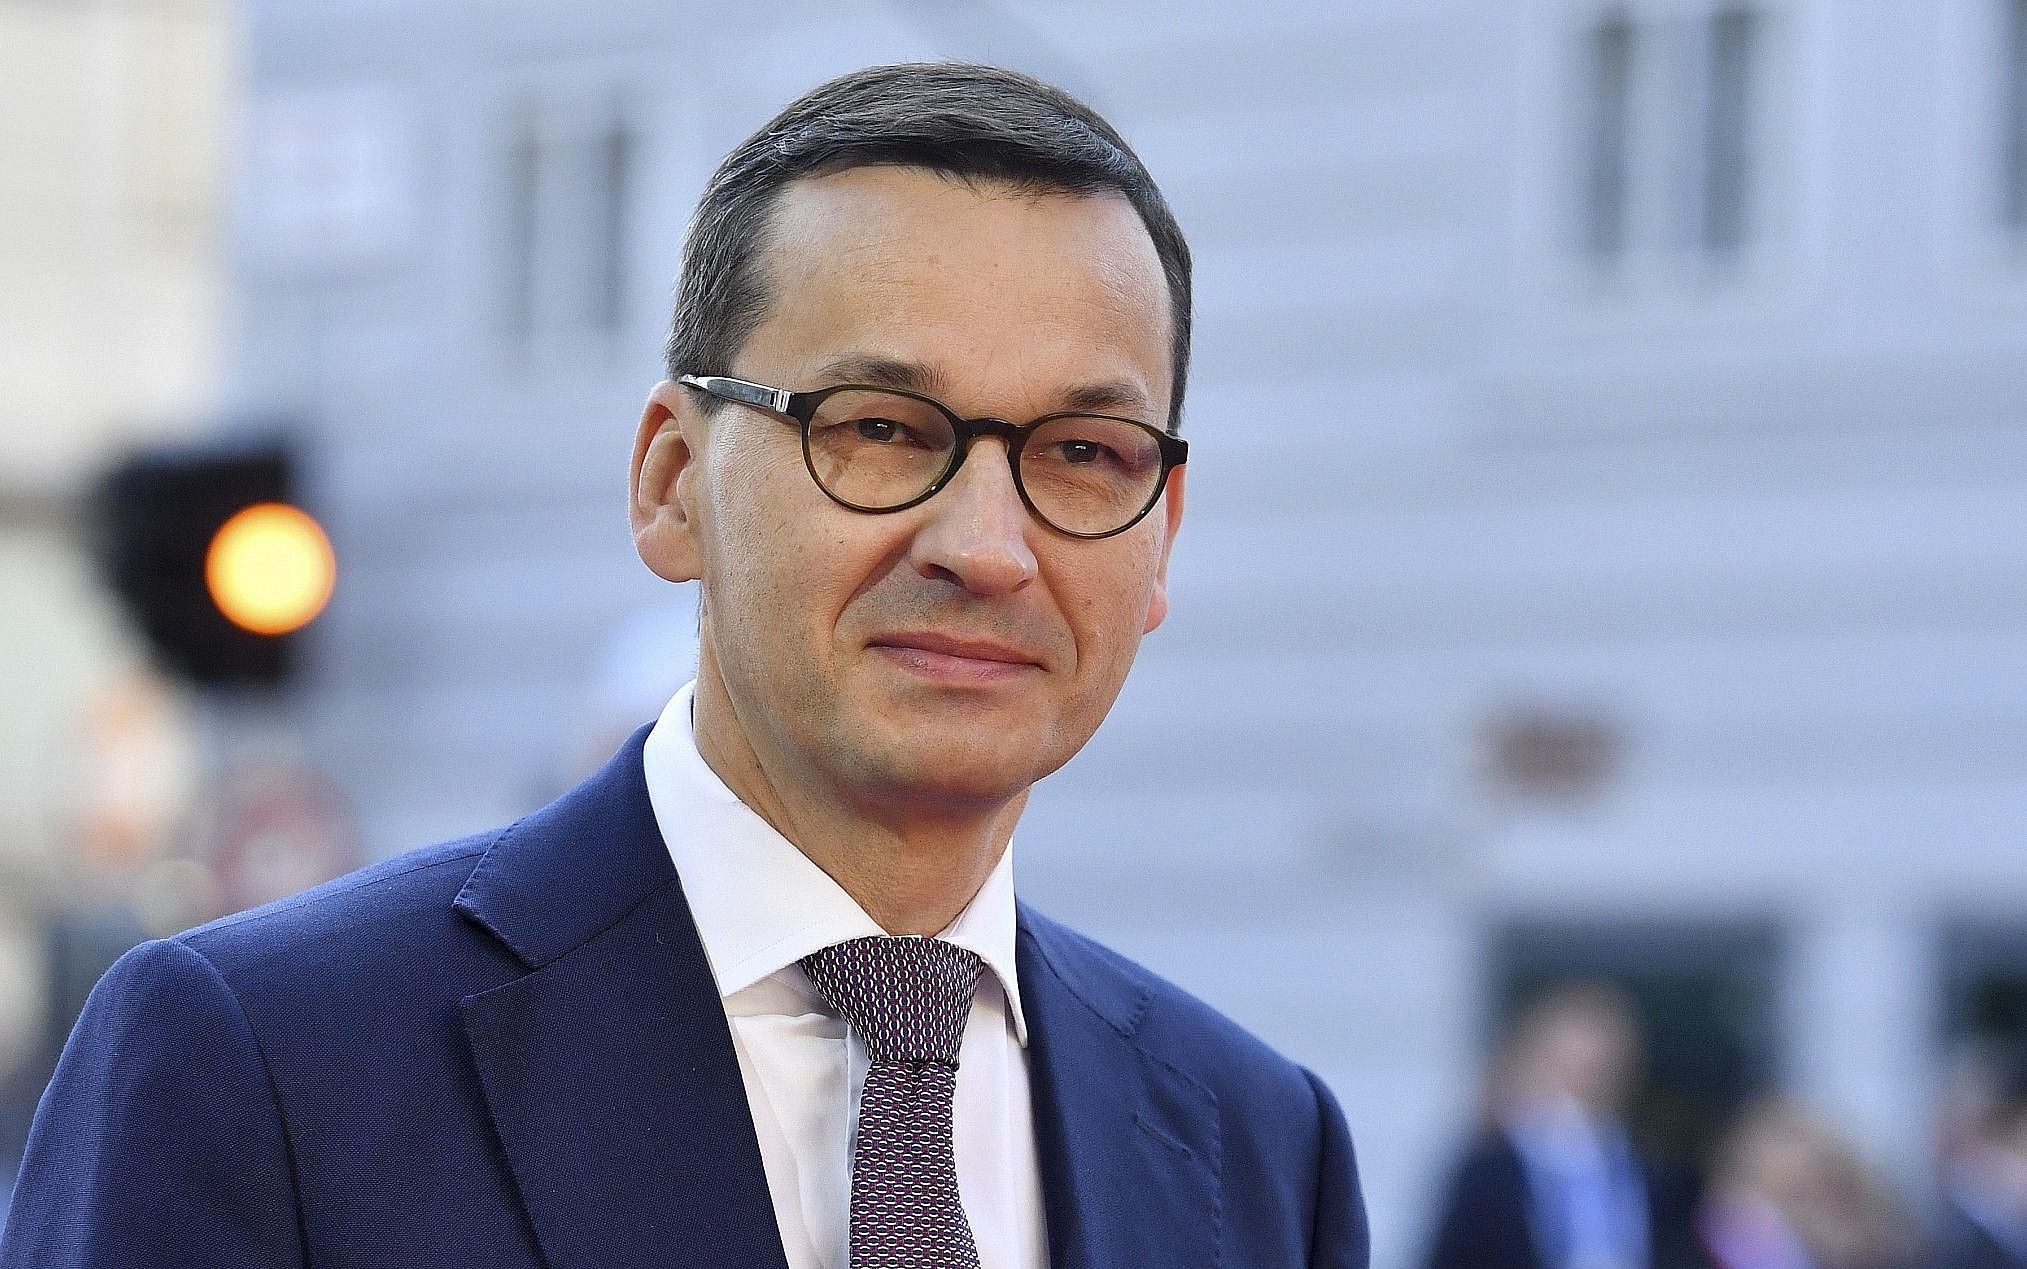 Poland PM Mateusz Morawiecki calls urgent meeting for national security after Russian missiles kill 2